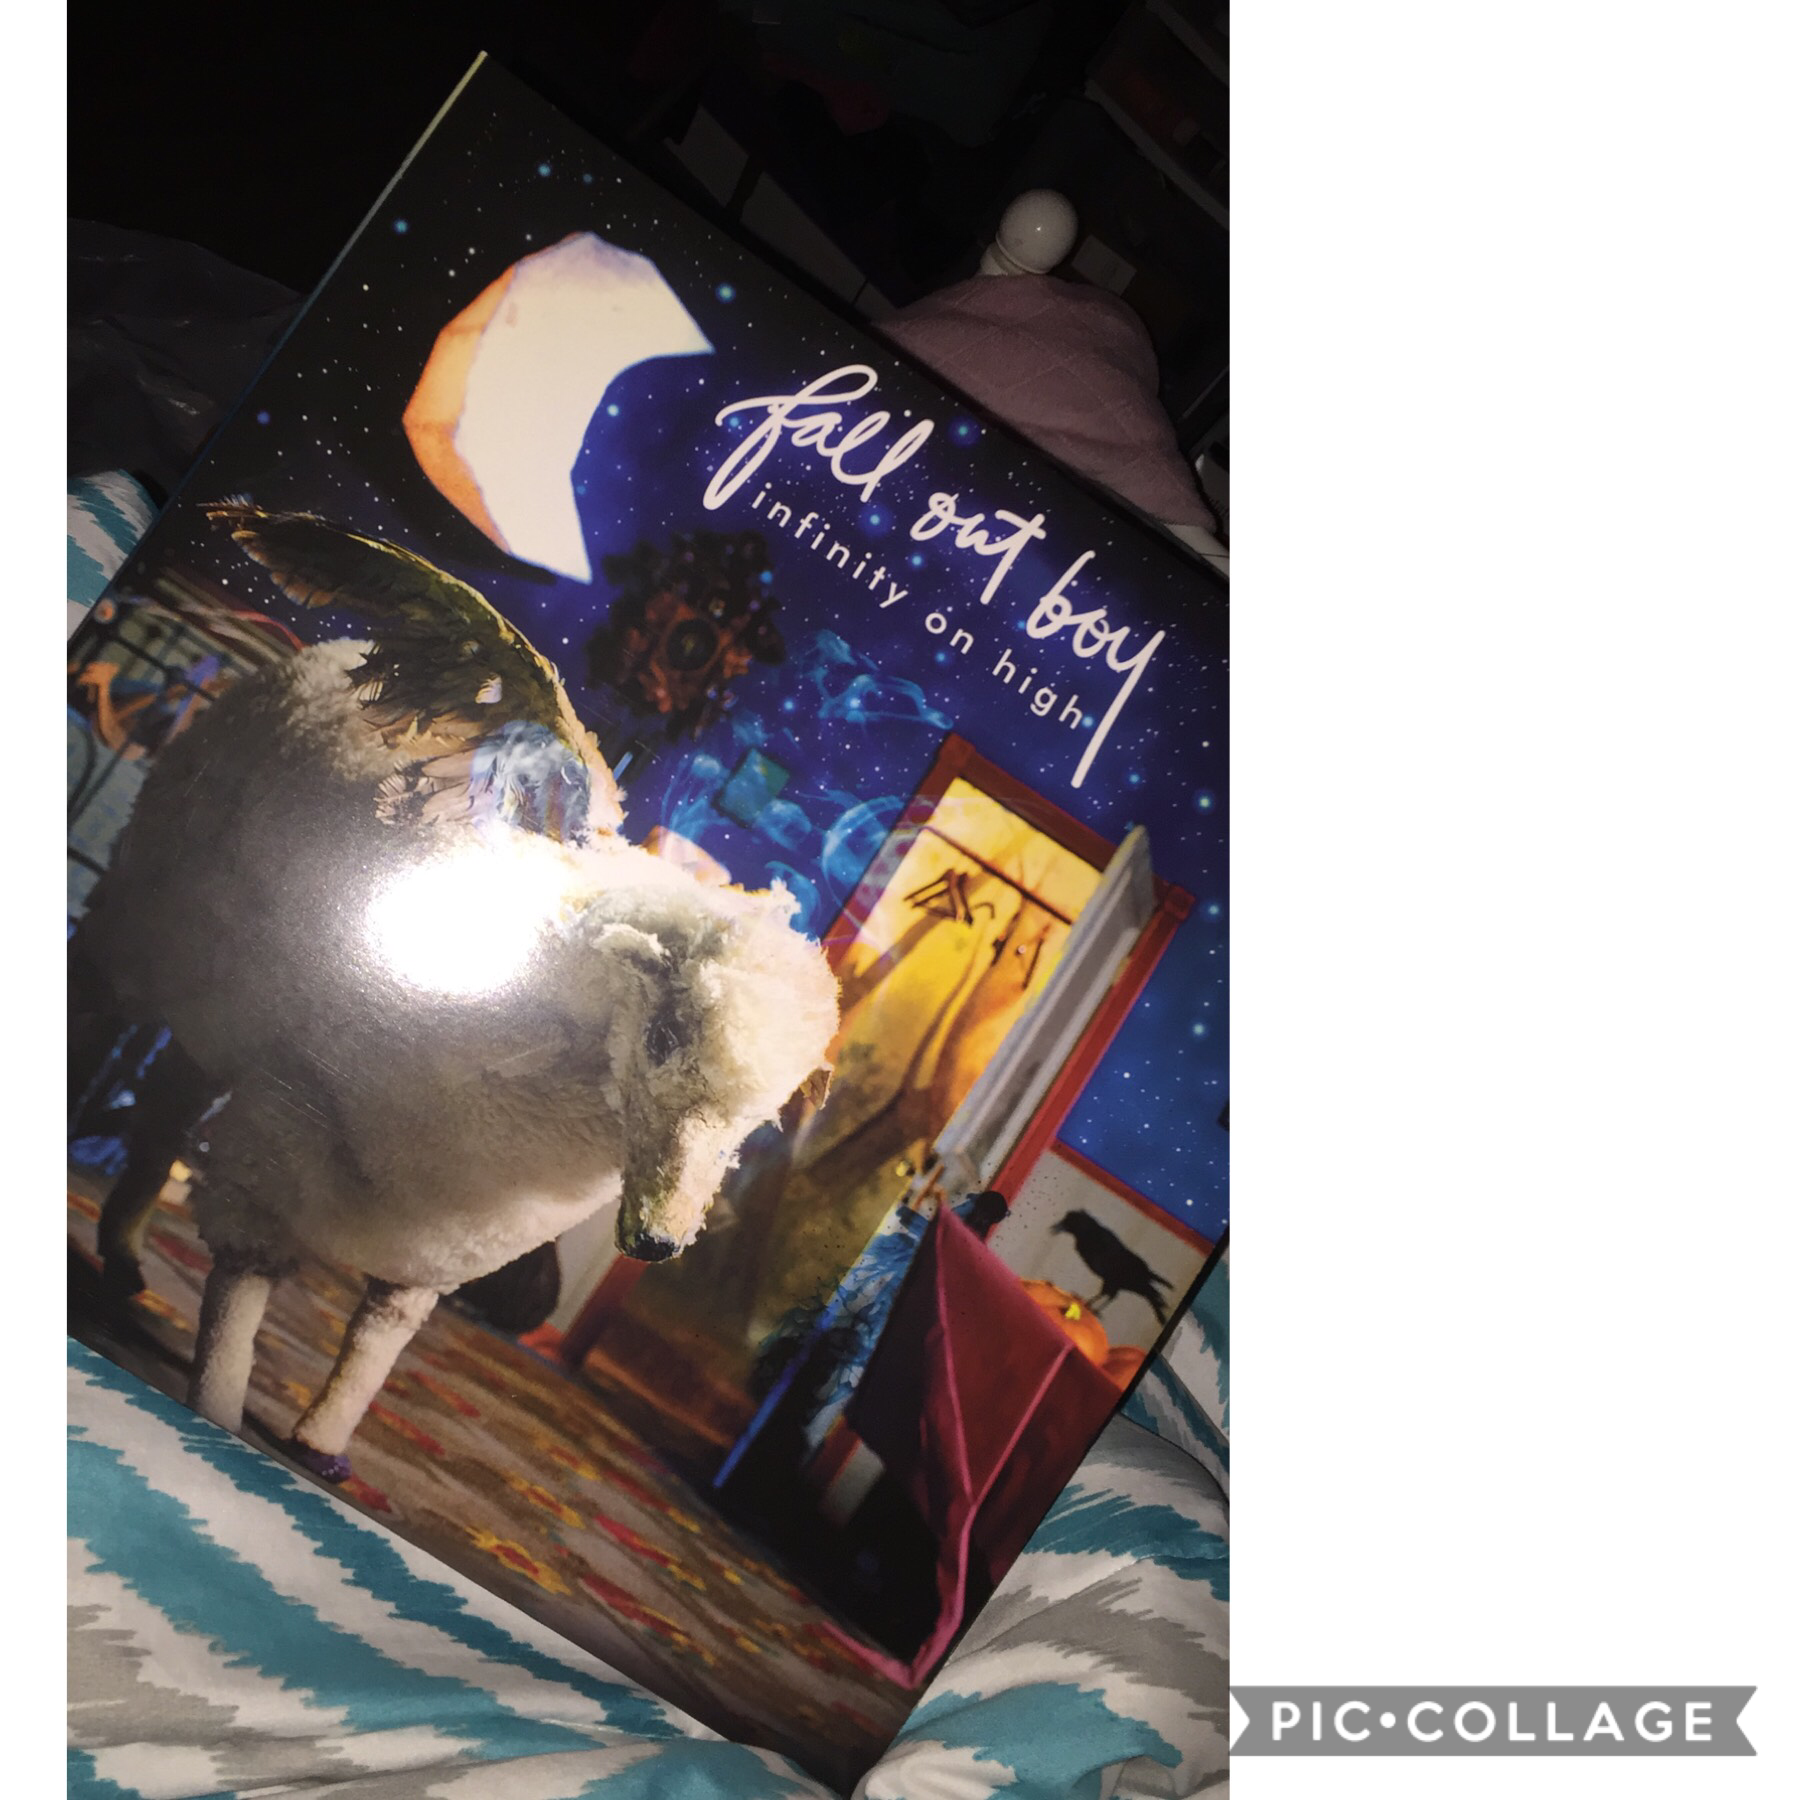 I got the infinity on high vinyl today and my love for Patrick stump has been rekindled 